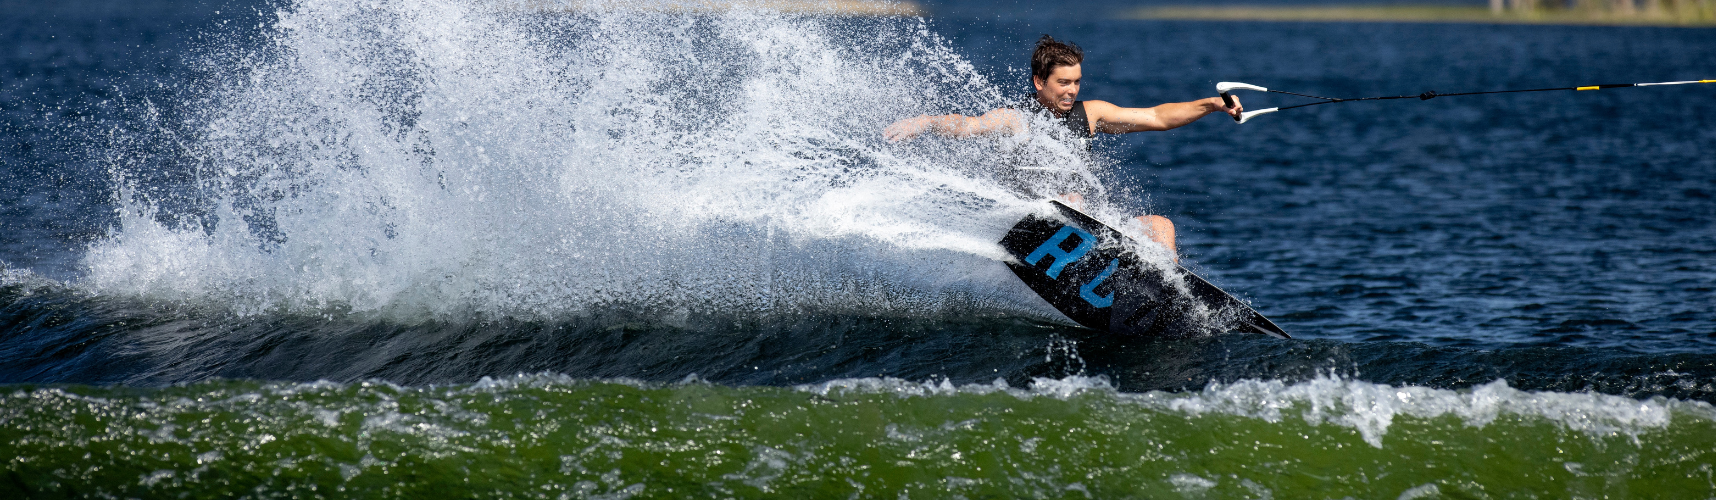 Man riding a Liquid Force Wakeboard